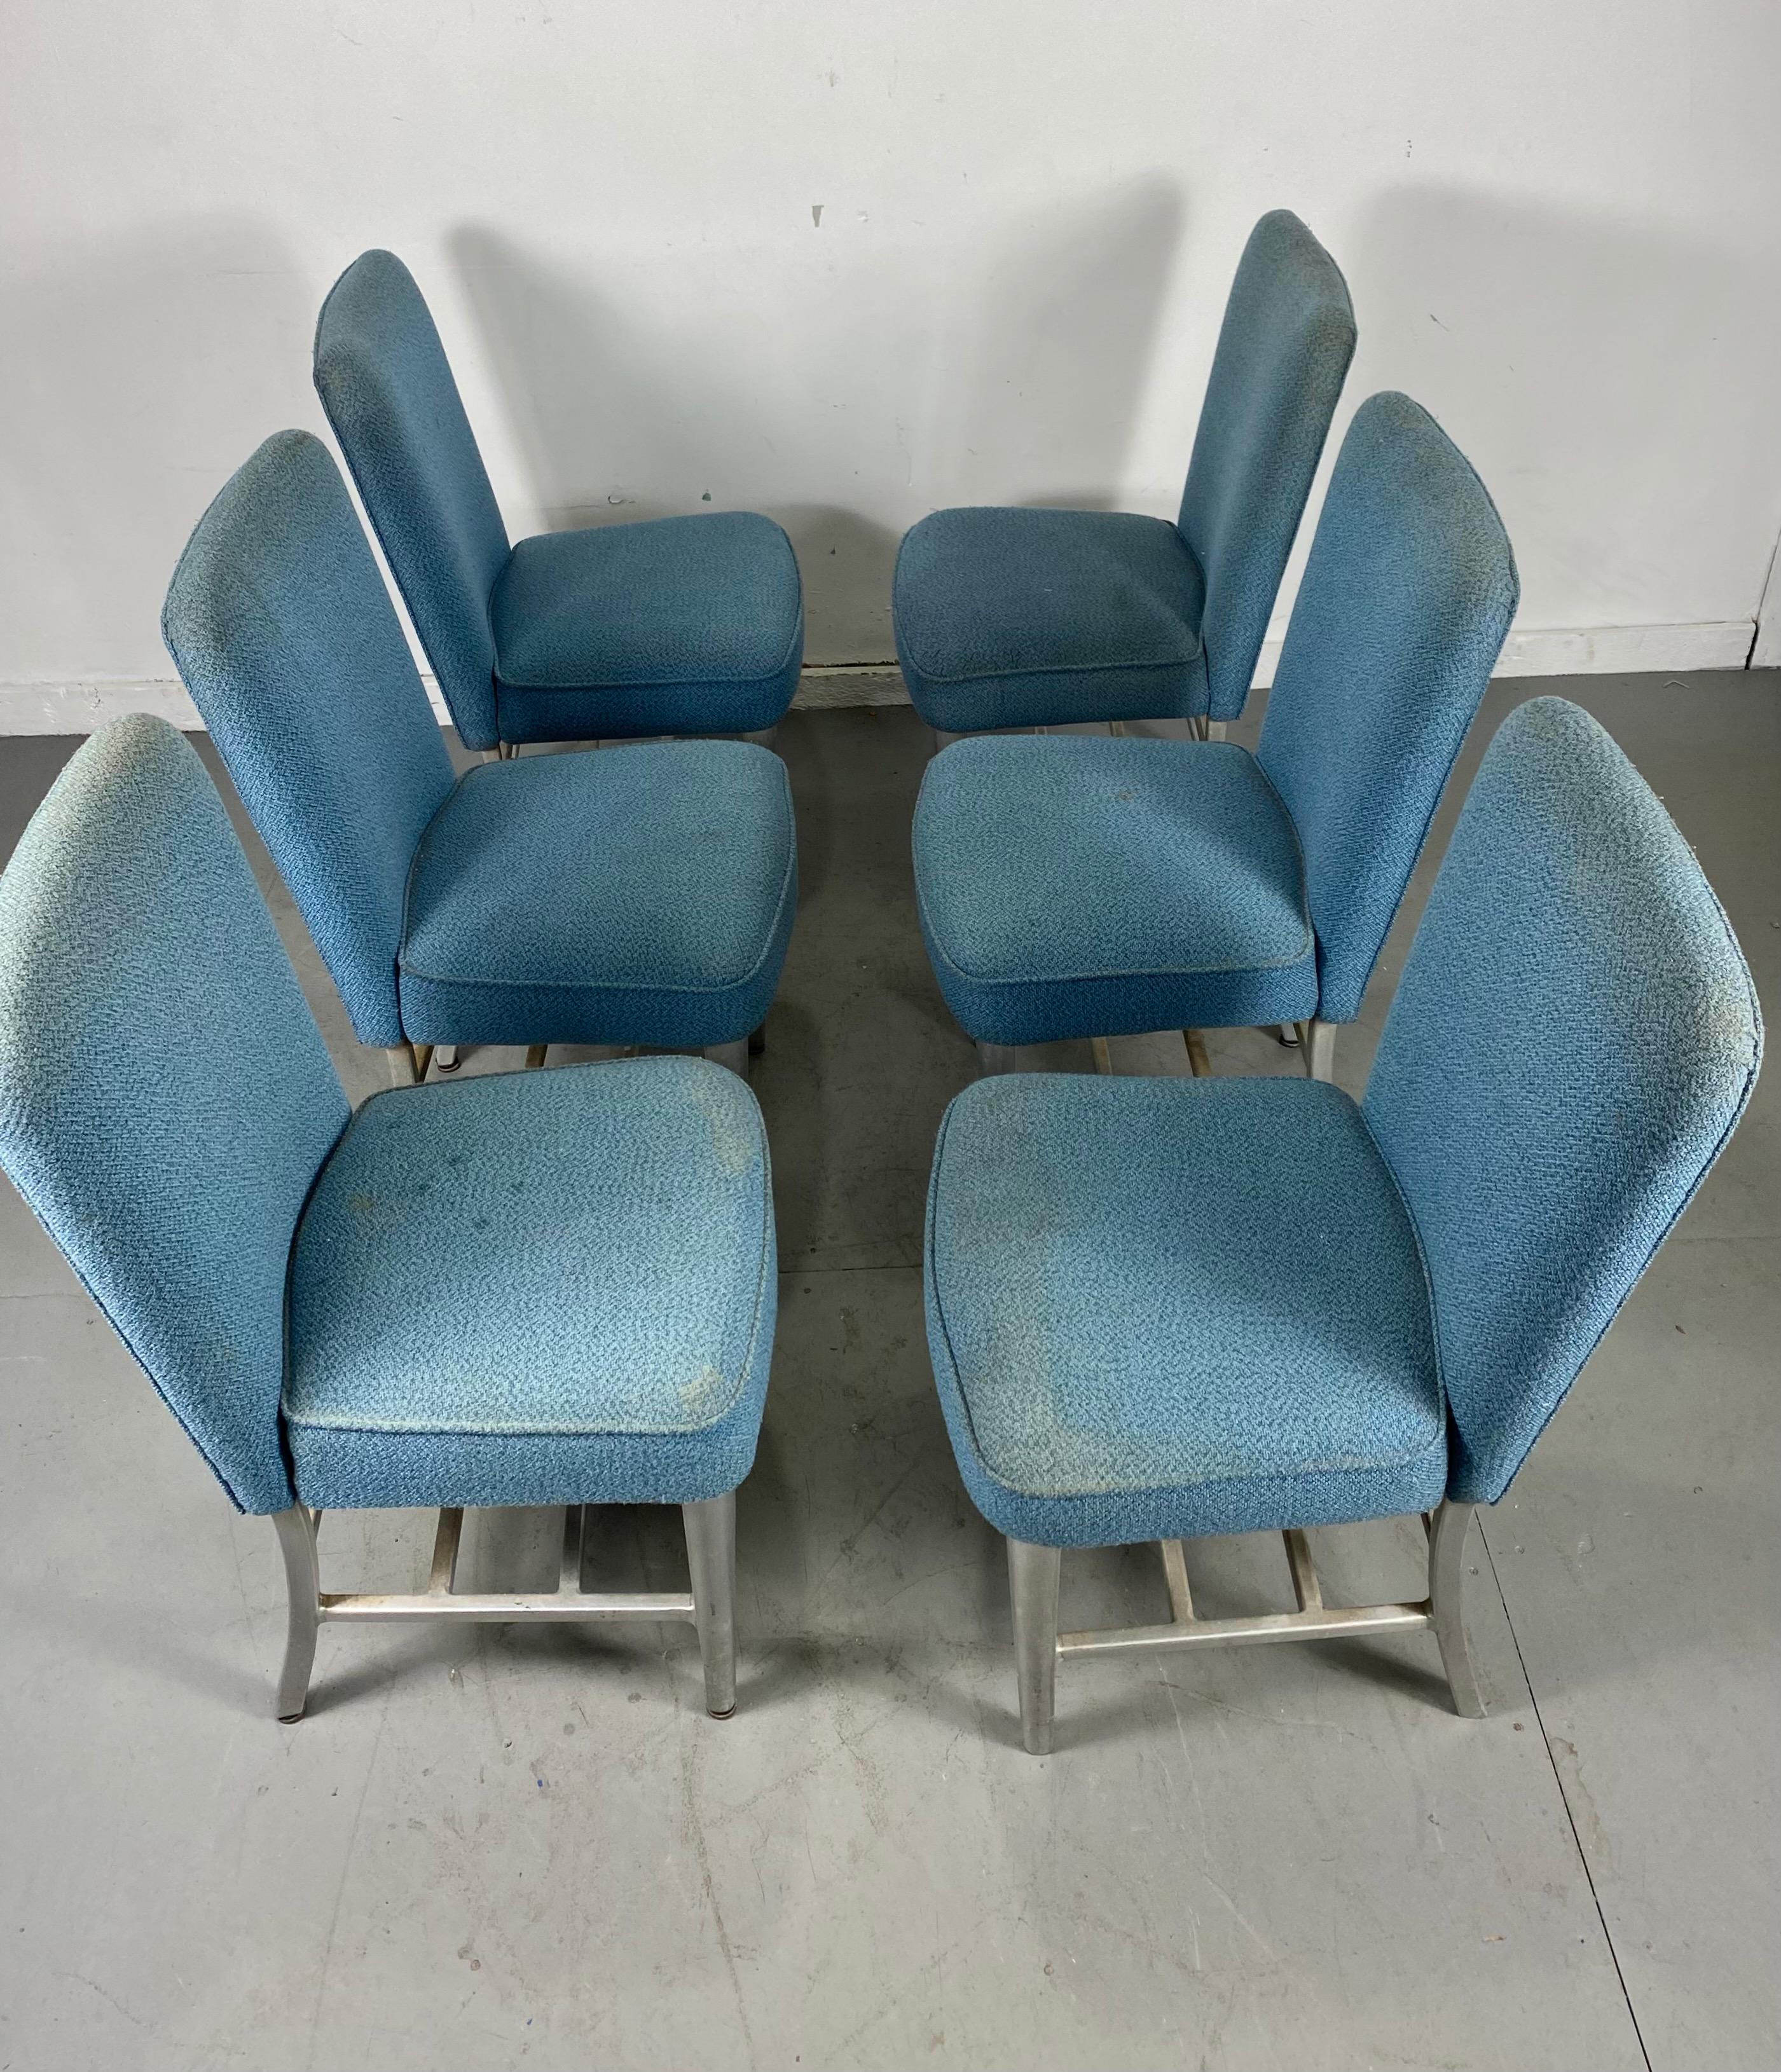 American Art Deco Pullman Dining Car Chairs, Aluminum and Fabric, Attributed to Emeco For Sale